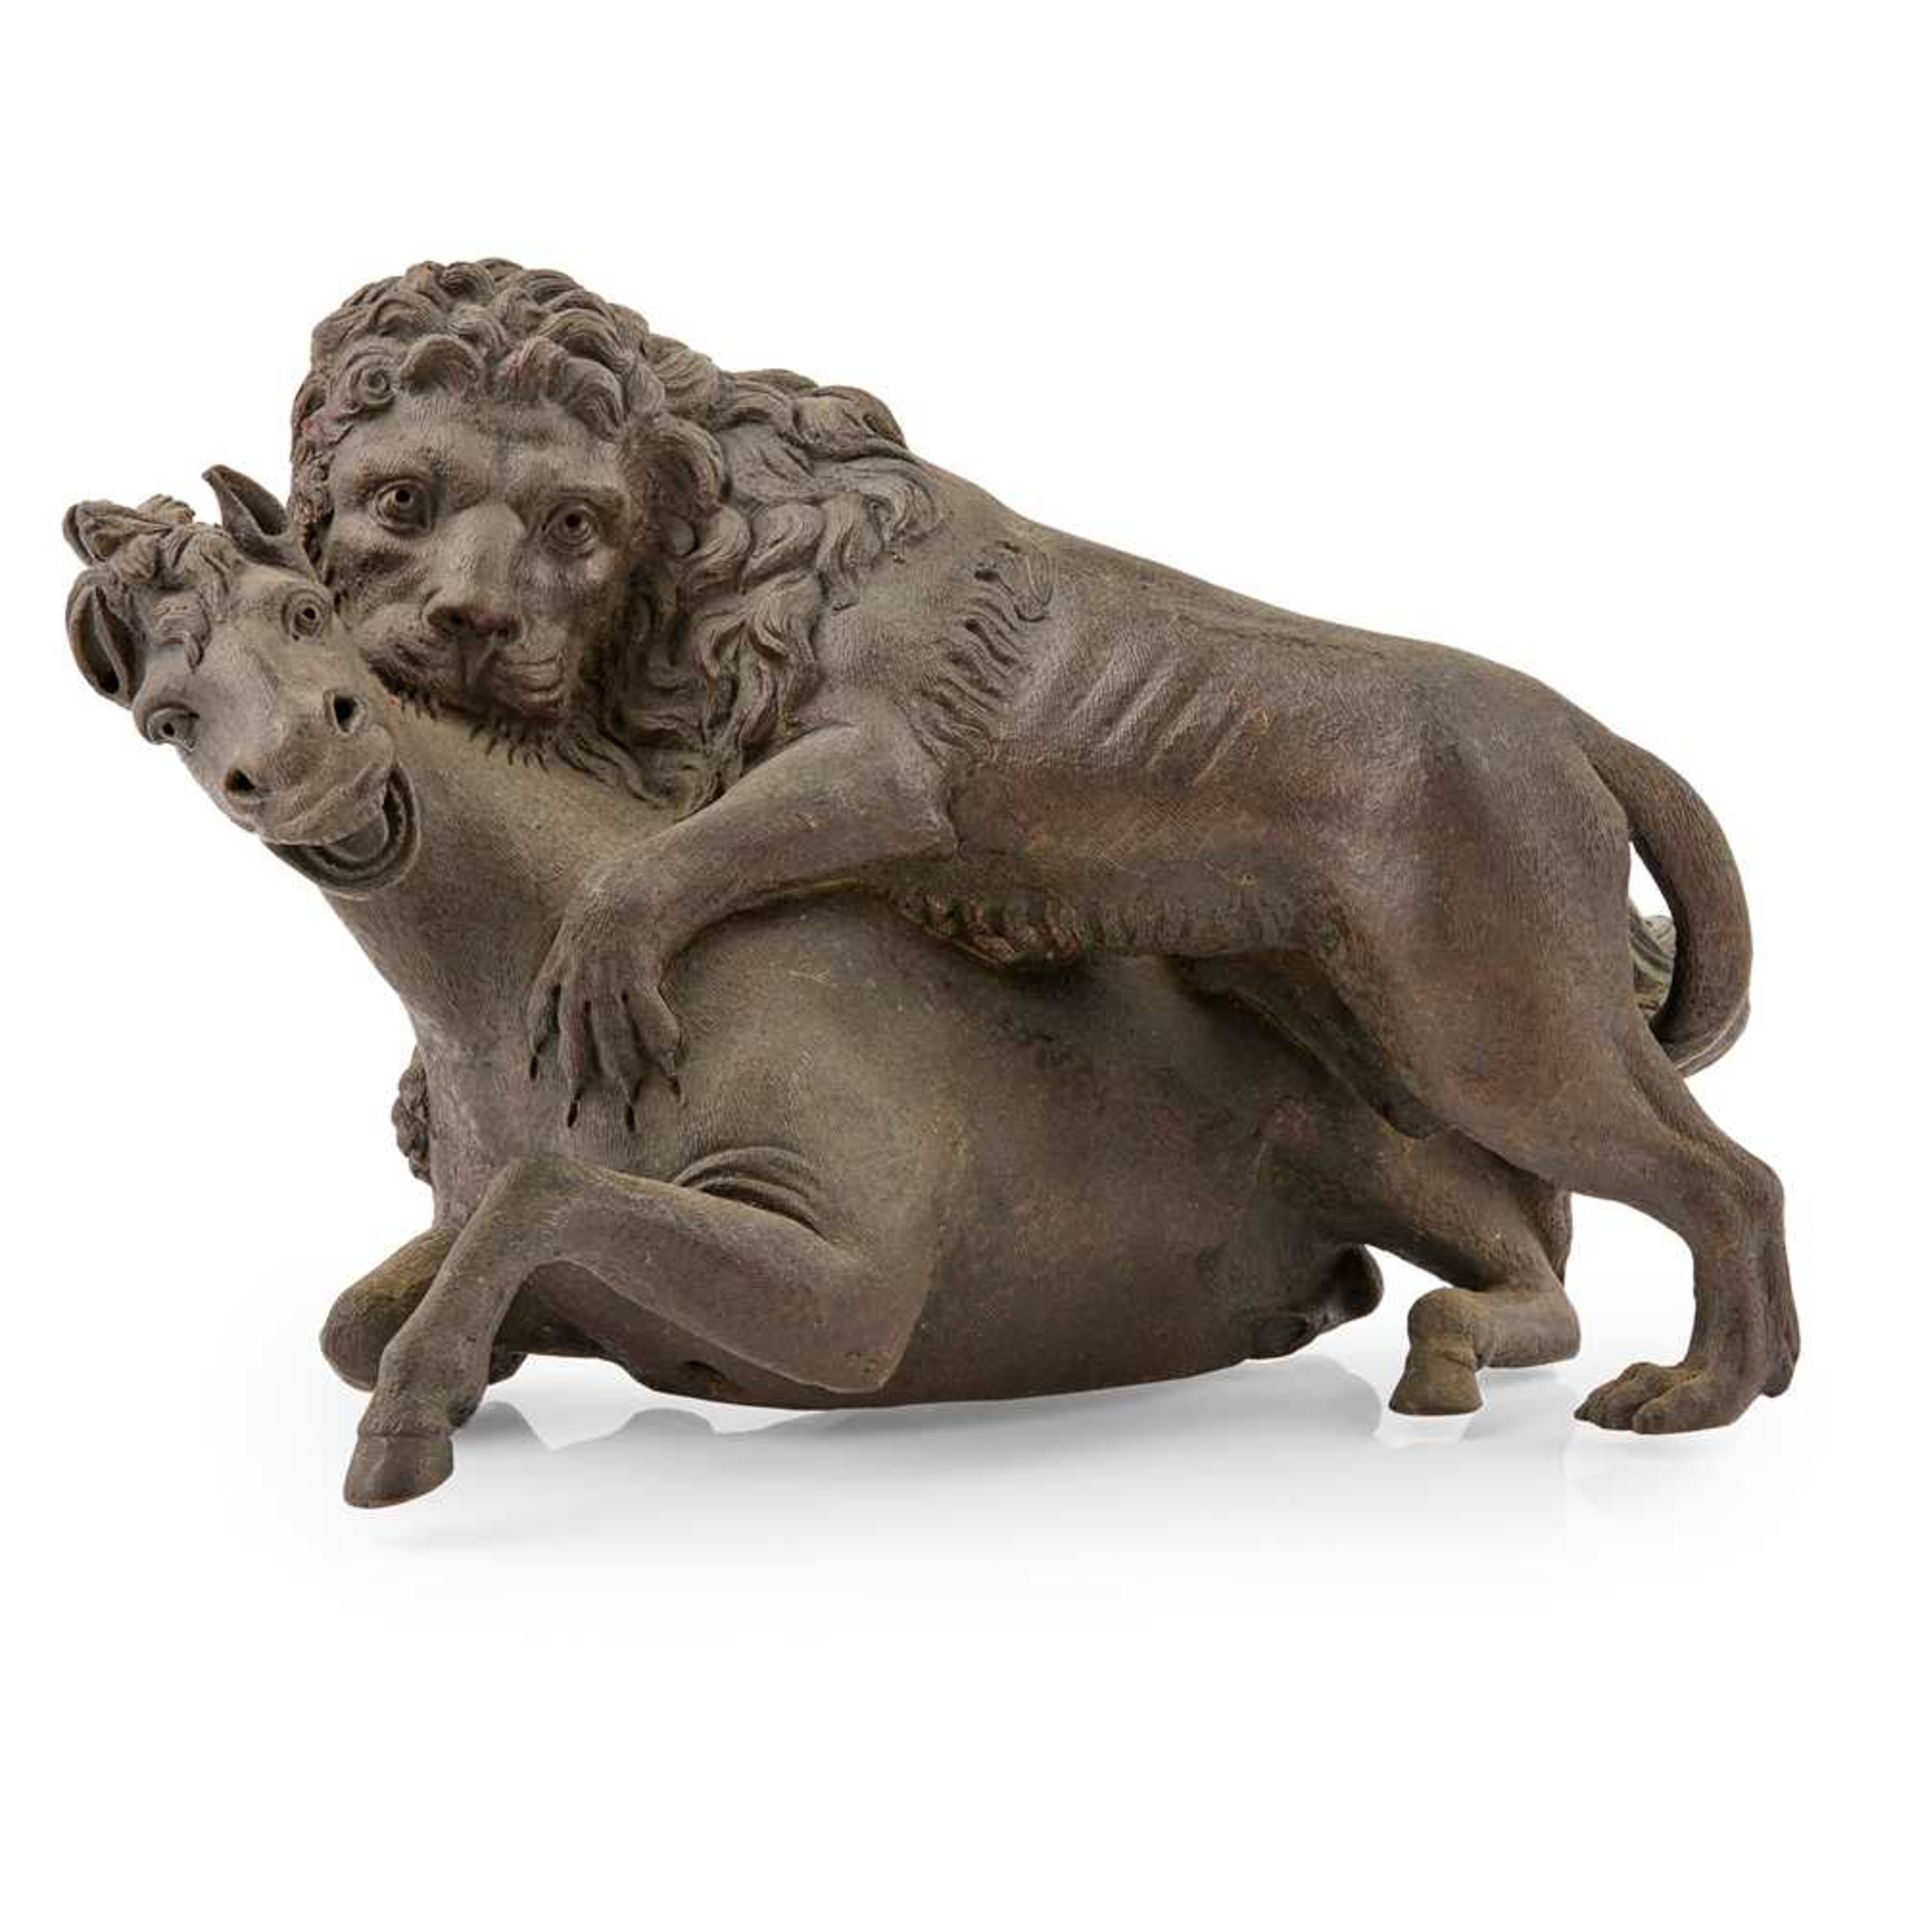 CIRCLE OF HANS REISINGER (GERMAN, ACTIVE LATE 16TH CENTURY), AFTER A MODEL BY GIAMBOLOGNA LION ATTAC - Image 2 of 2